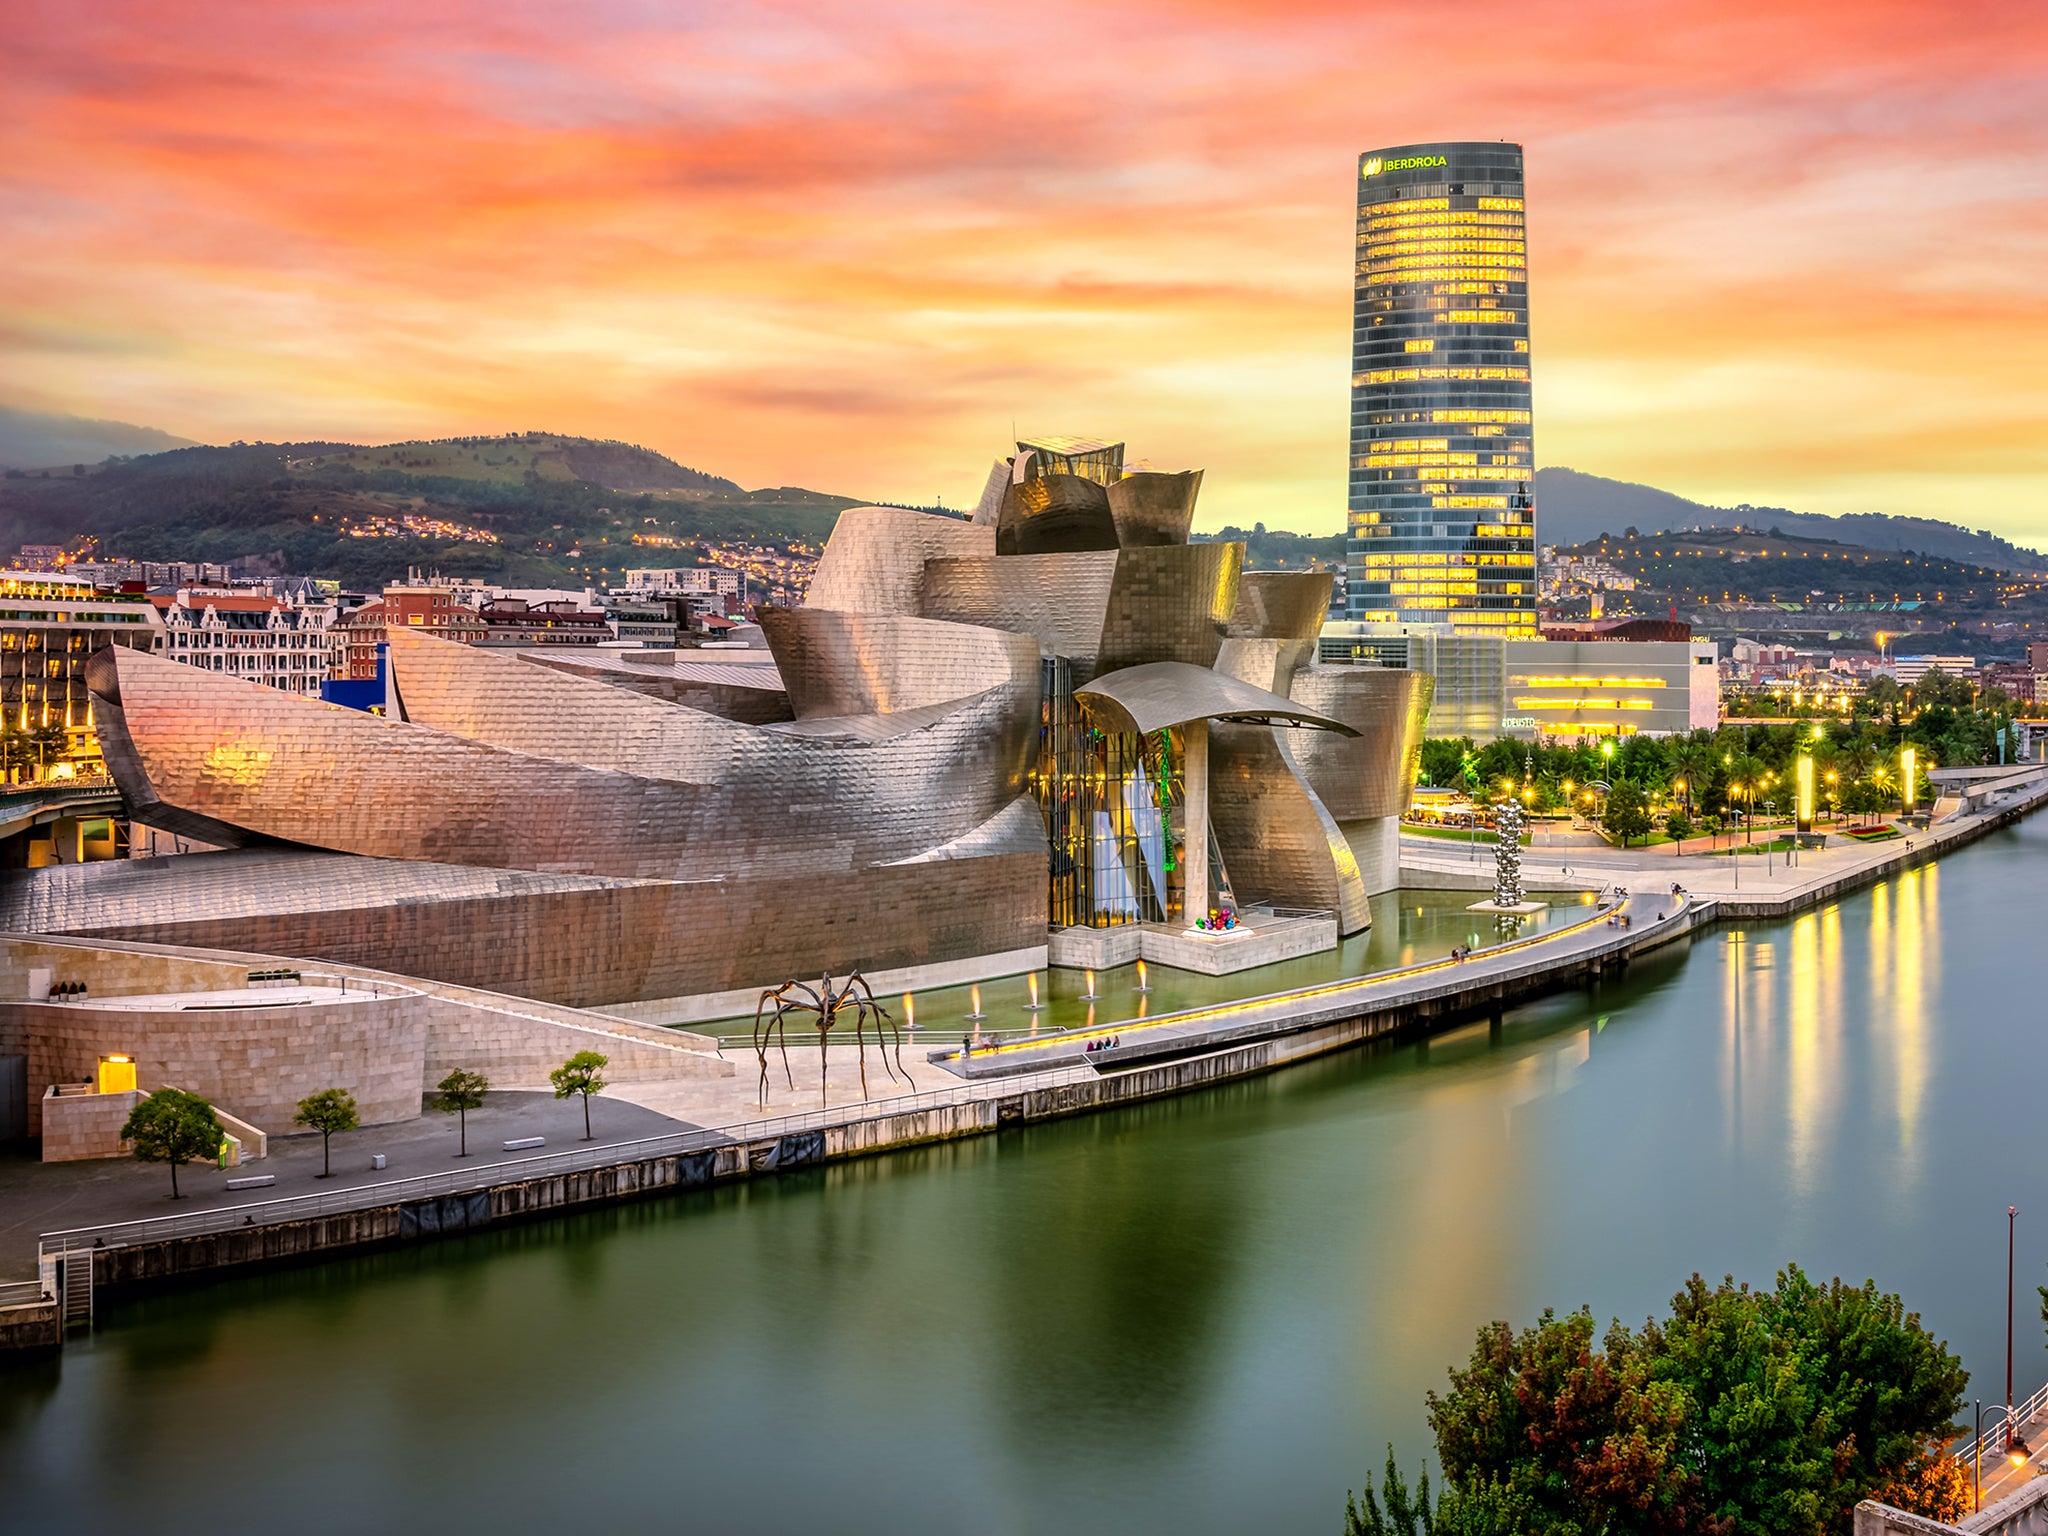 Designed by US architect Frank Gehry, the Bilbao Guggenheim is an extraordinary building